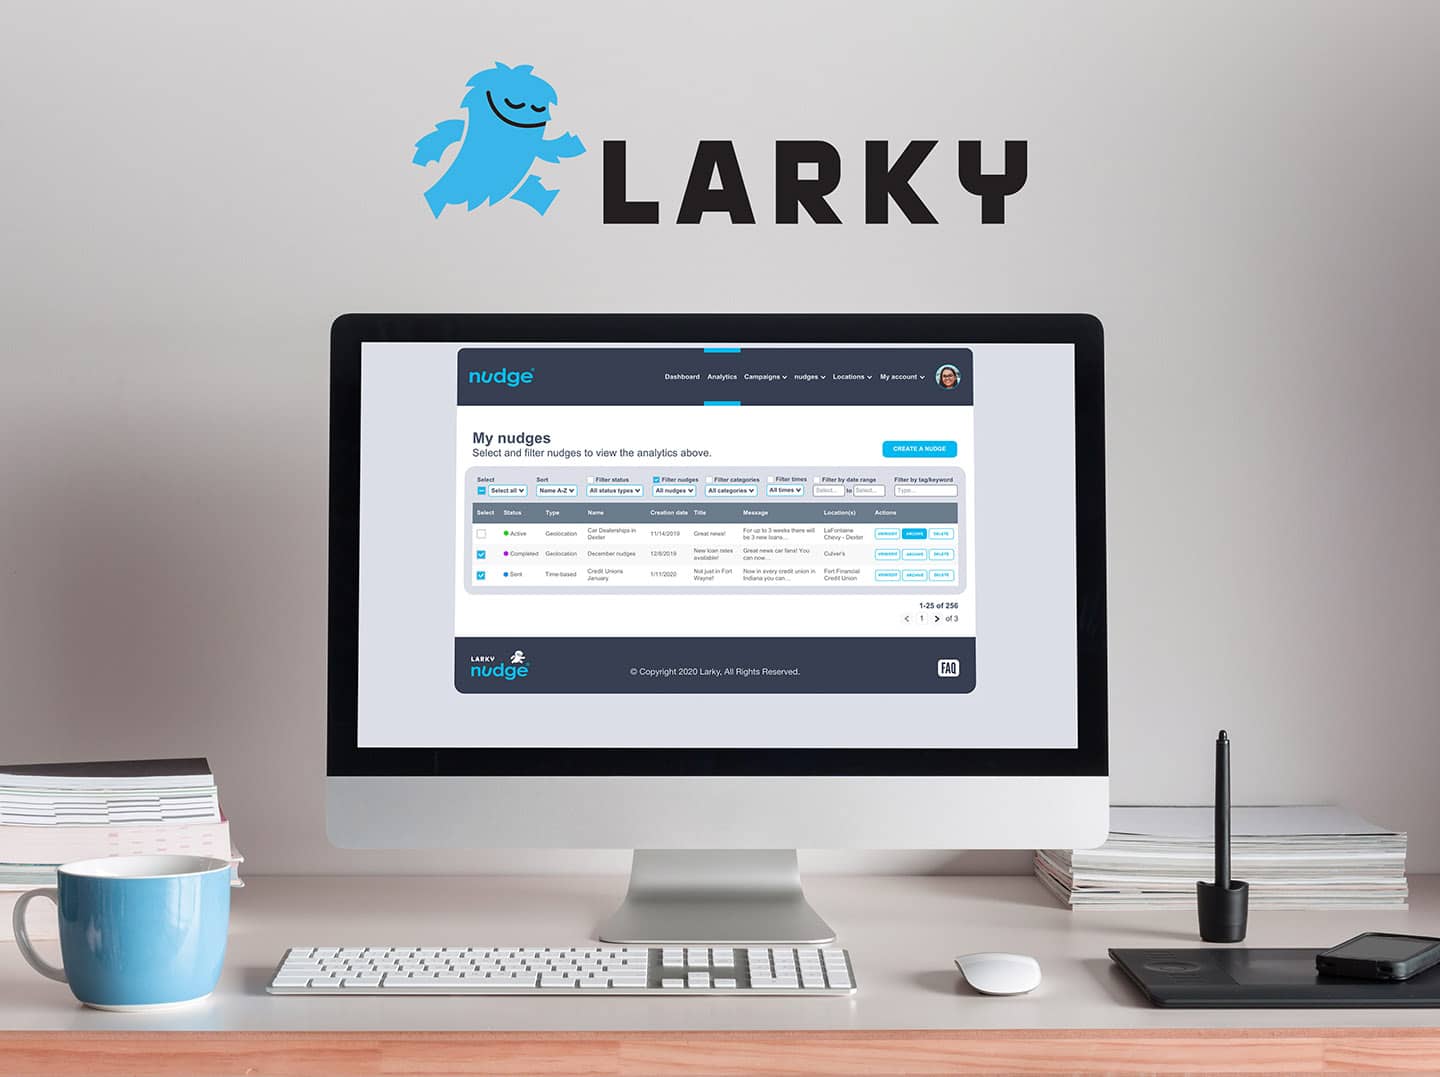 Laptop showing the Larky website